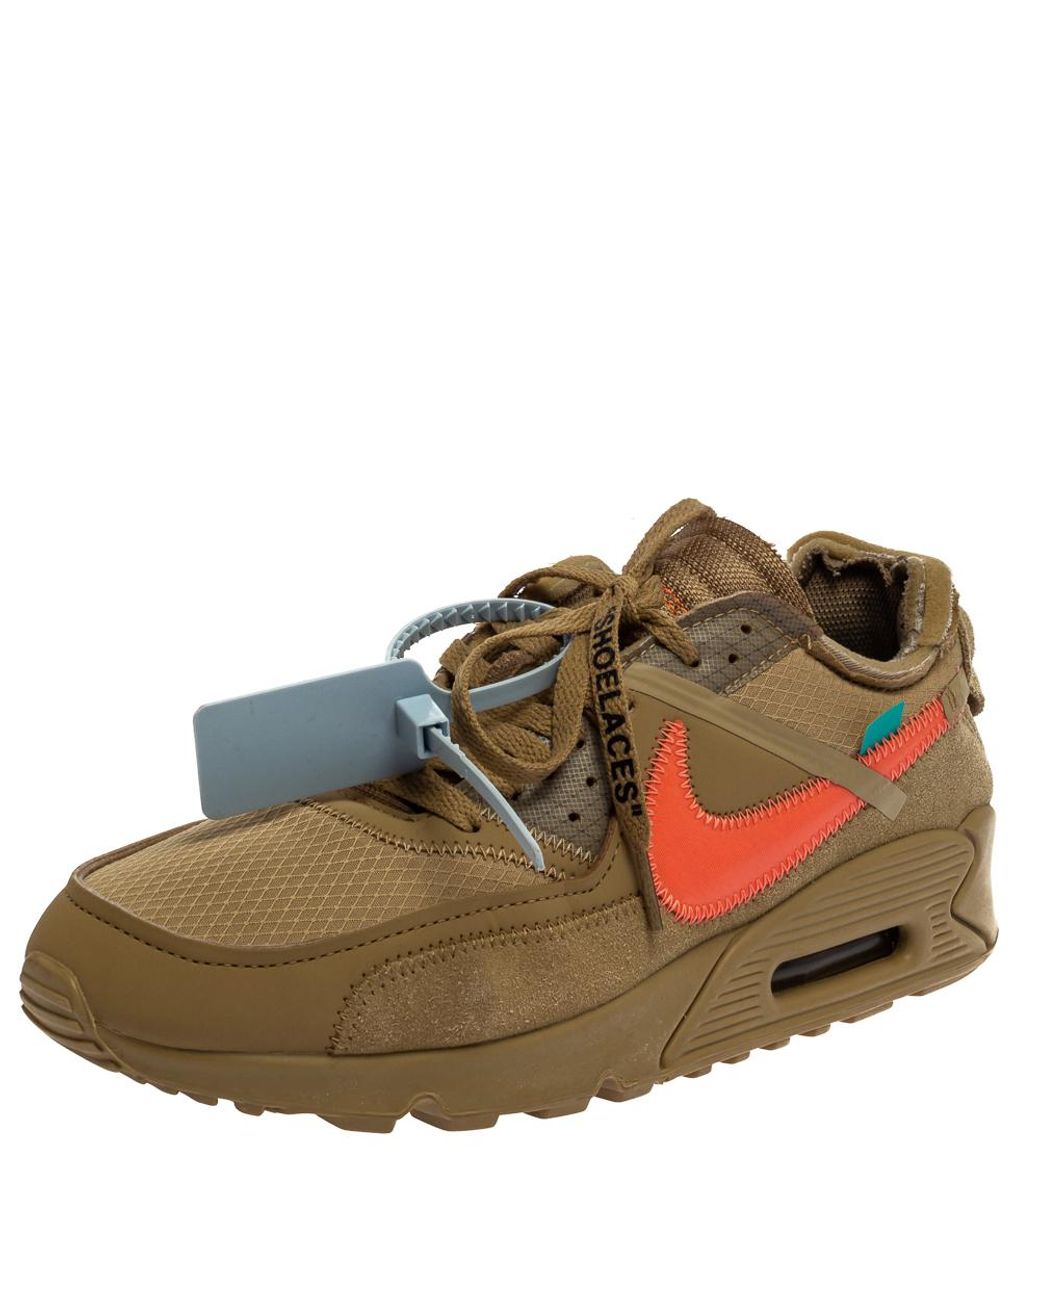 NIKE X OFF-WHITE Brown Mesh And Suede Air Max 90 Desert Ore Sneakers ...